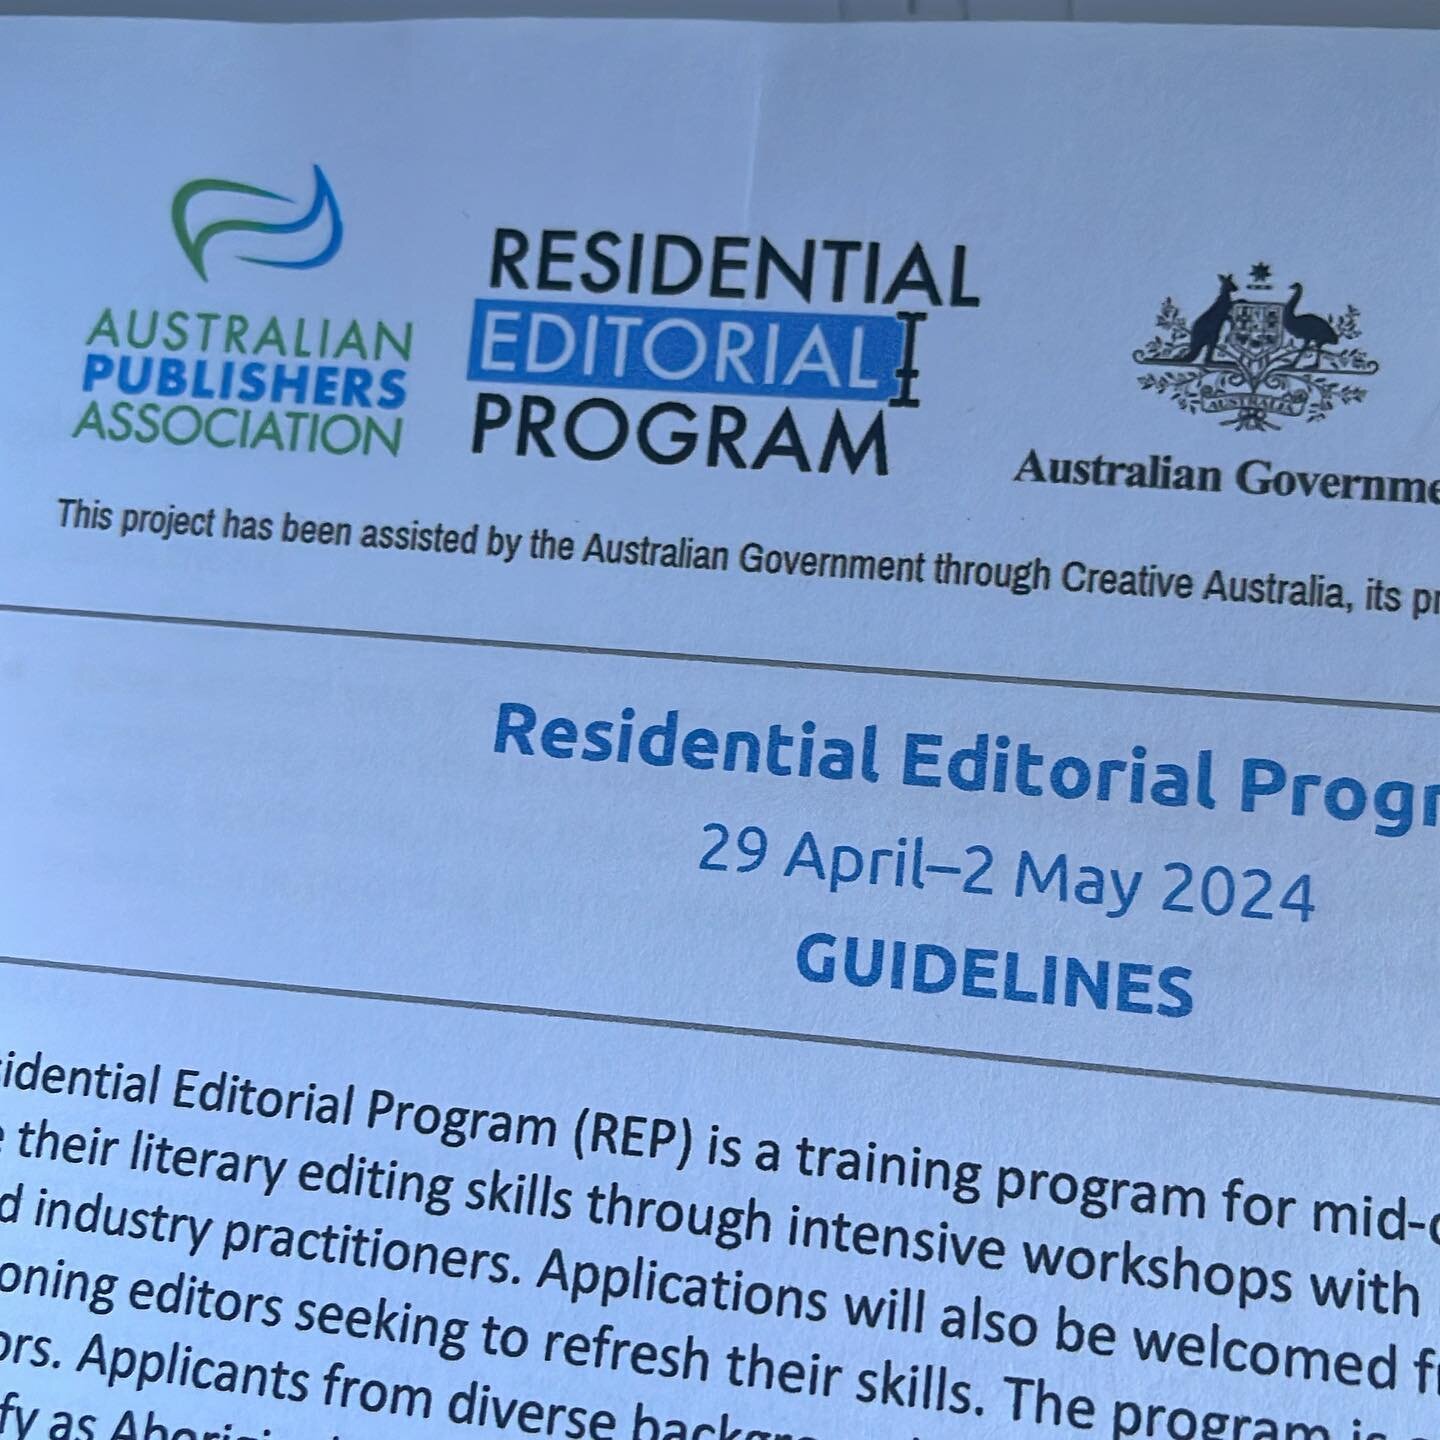 Congratulations to the 15 editors selected for this year&rsquo;s Residential Editorial Program (REP). The Australian Publishers Association runs this intensive program for mid-career editors every two years and participants work on an unpublished man